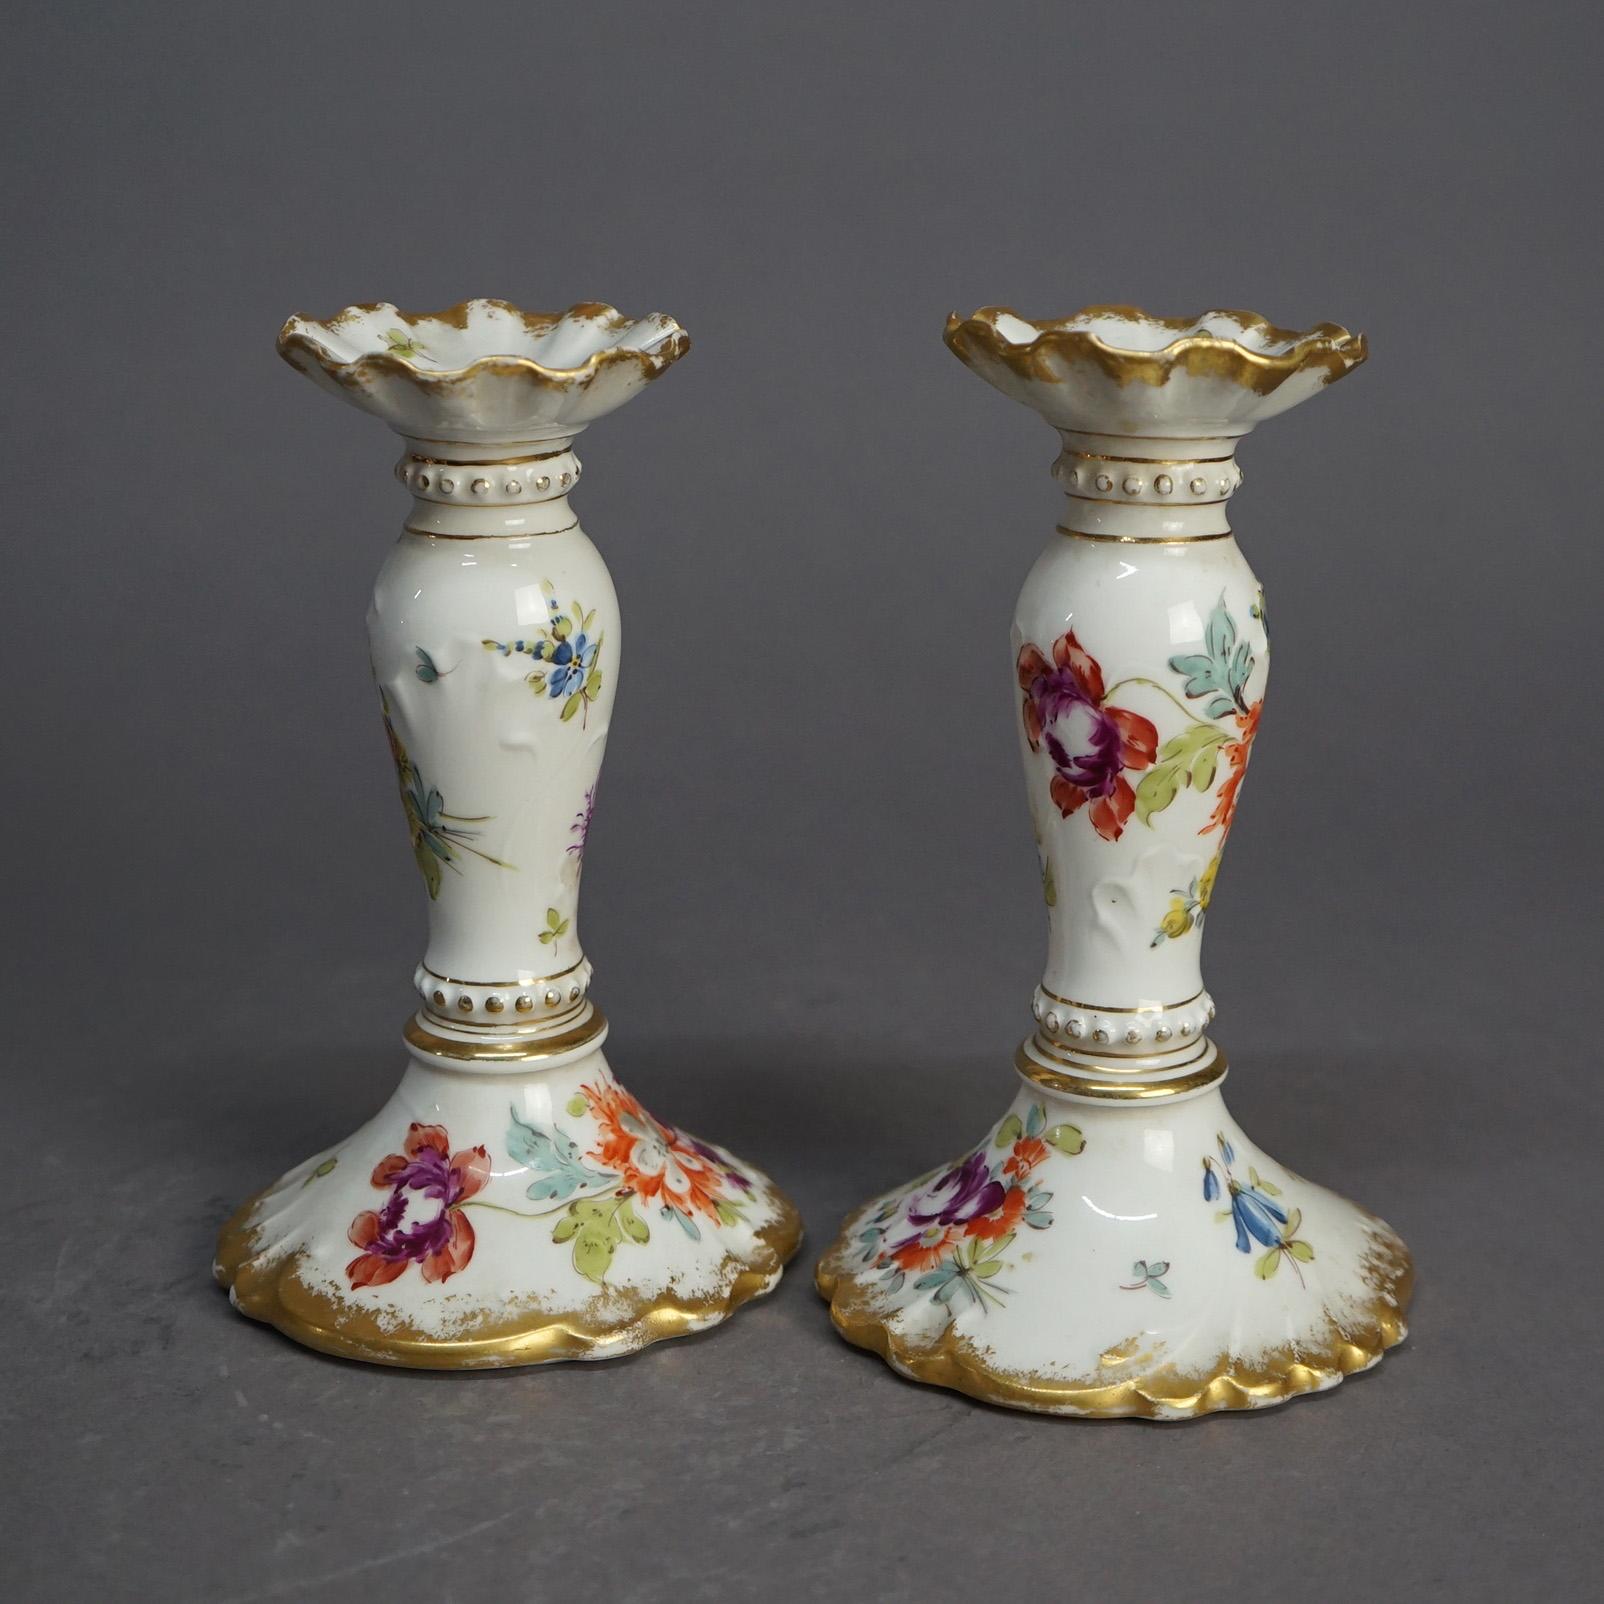 An antique German pair of candlesticks offer porcelain construction with hand painted floral decoration and gilt highlights throughout, Berlin stamped on bases as photographed, c1900

Measures- 7.25''H x 4.25''W x 4.5''D.